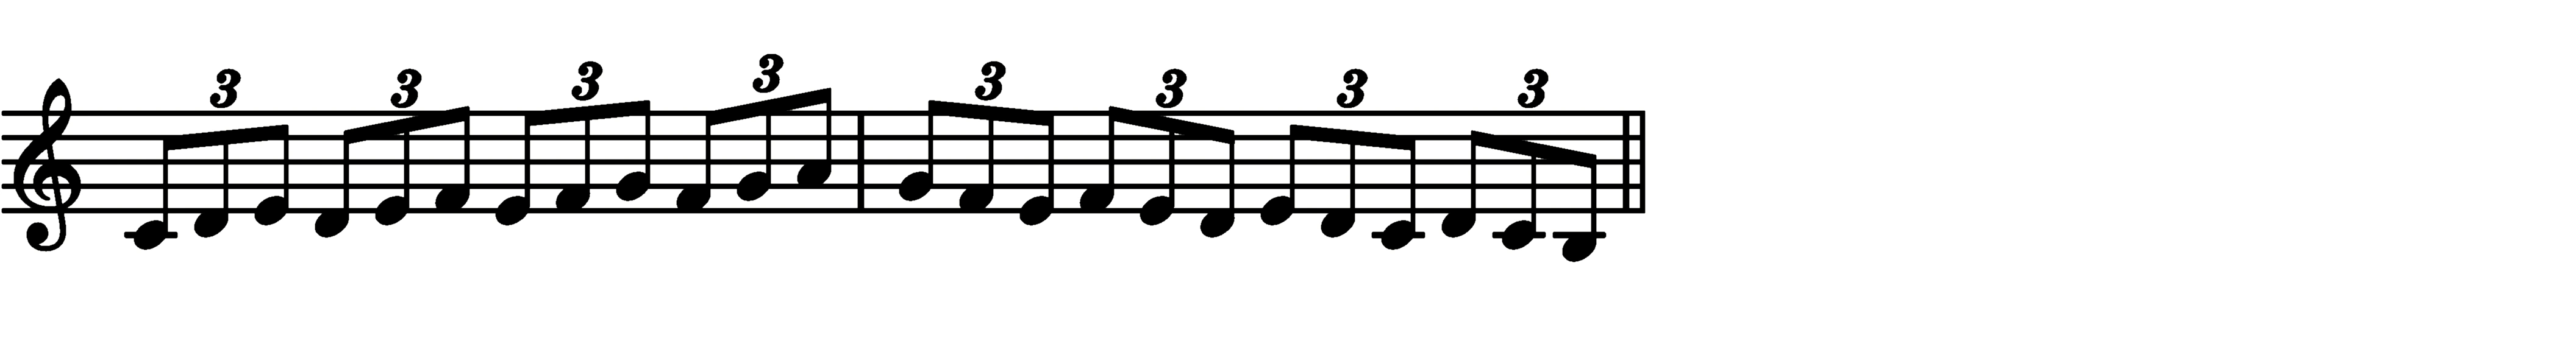 teraveling-pattern-melodic-gesture